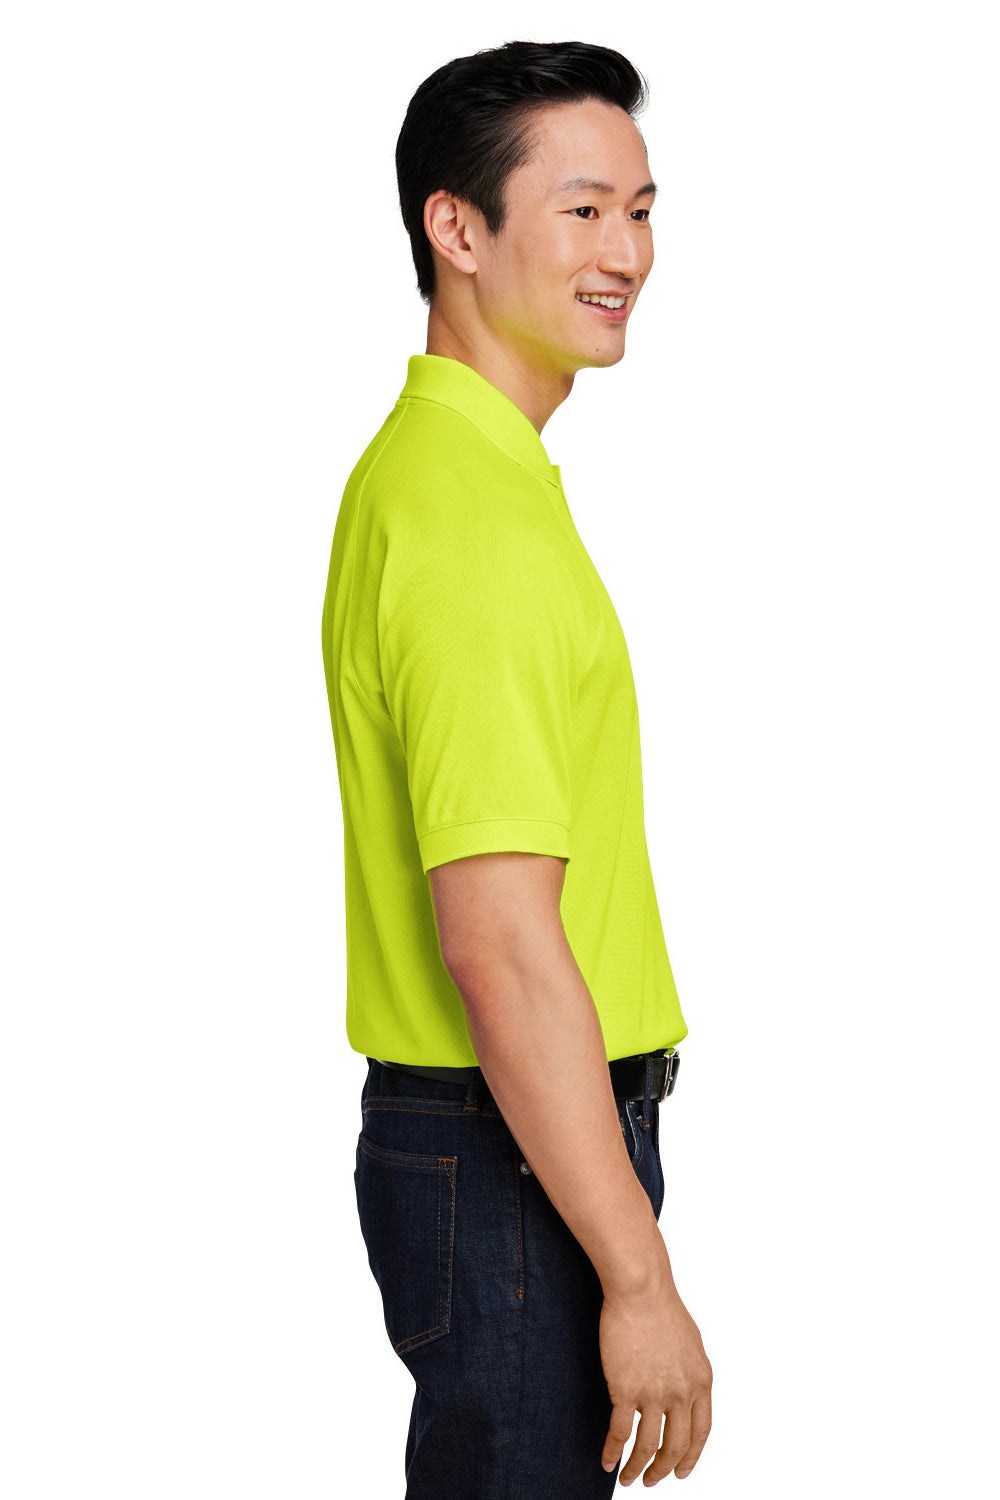 Harriton M208 Mens Charge Moisture Wicking Short Sleeve Polo Shirt Safety Yellow Side